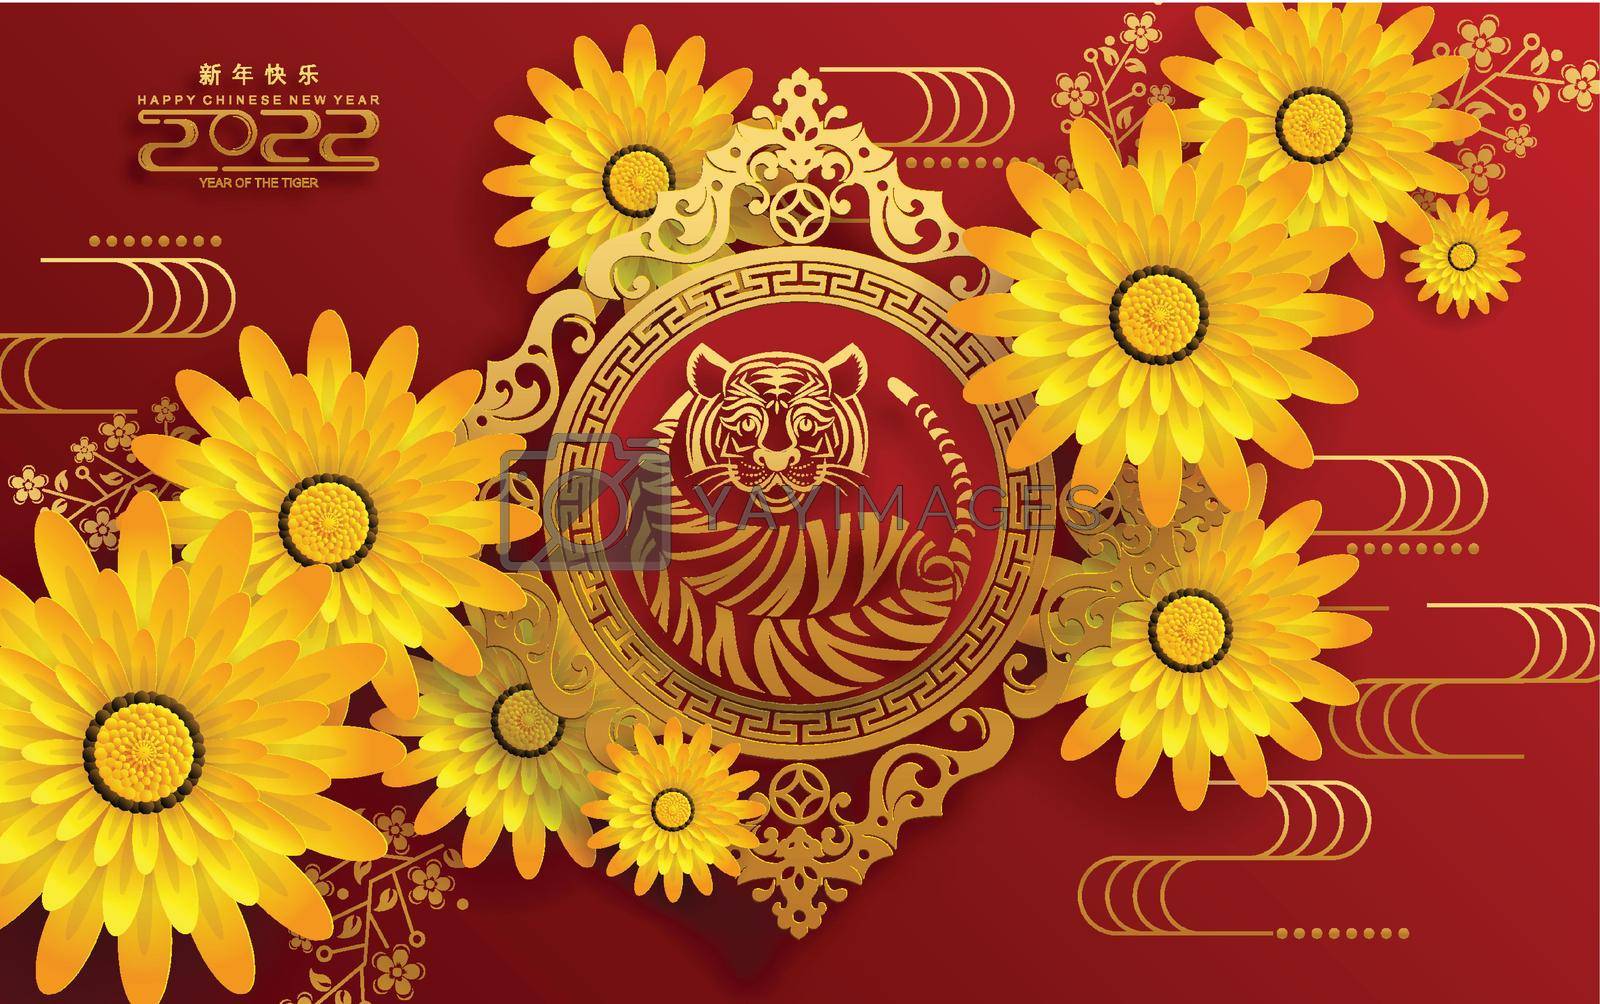 Royalty free image of Happy chinese new year 2022 year of the tiger by SiamVector